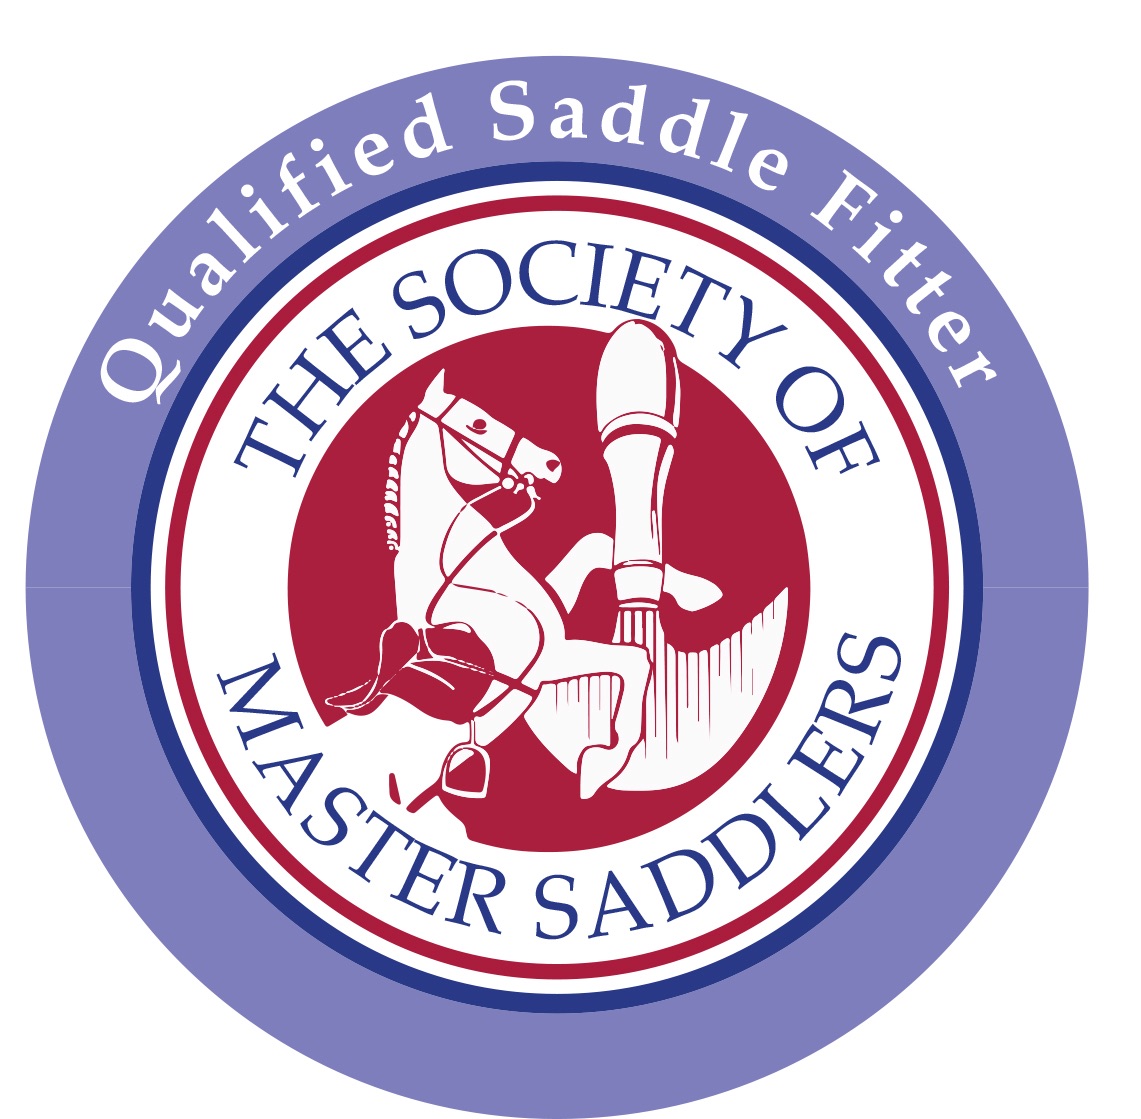 Qualified Master Saddle Fitter